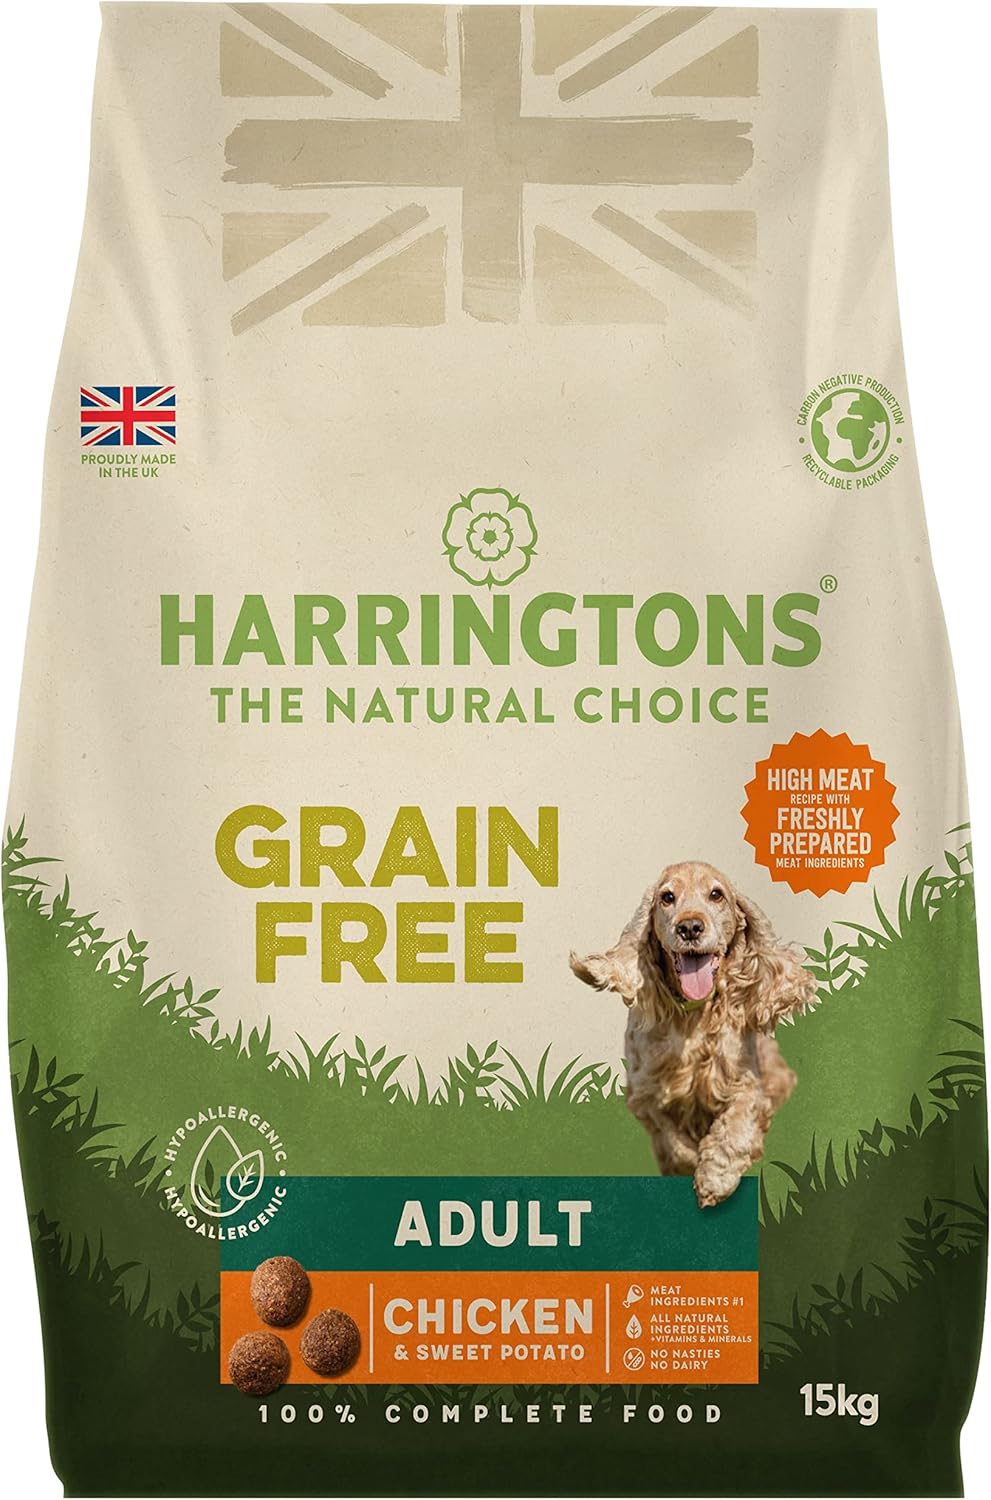 Harringtons Complete Grain Free Hypoallergenic Chicken & Sweet Potato Dry Adult Dog Food 15kg - Made with All Natural Ingredients?GFHYPC-15